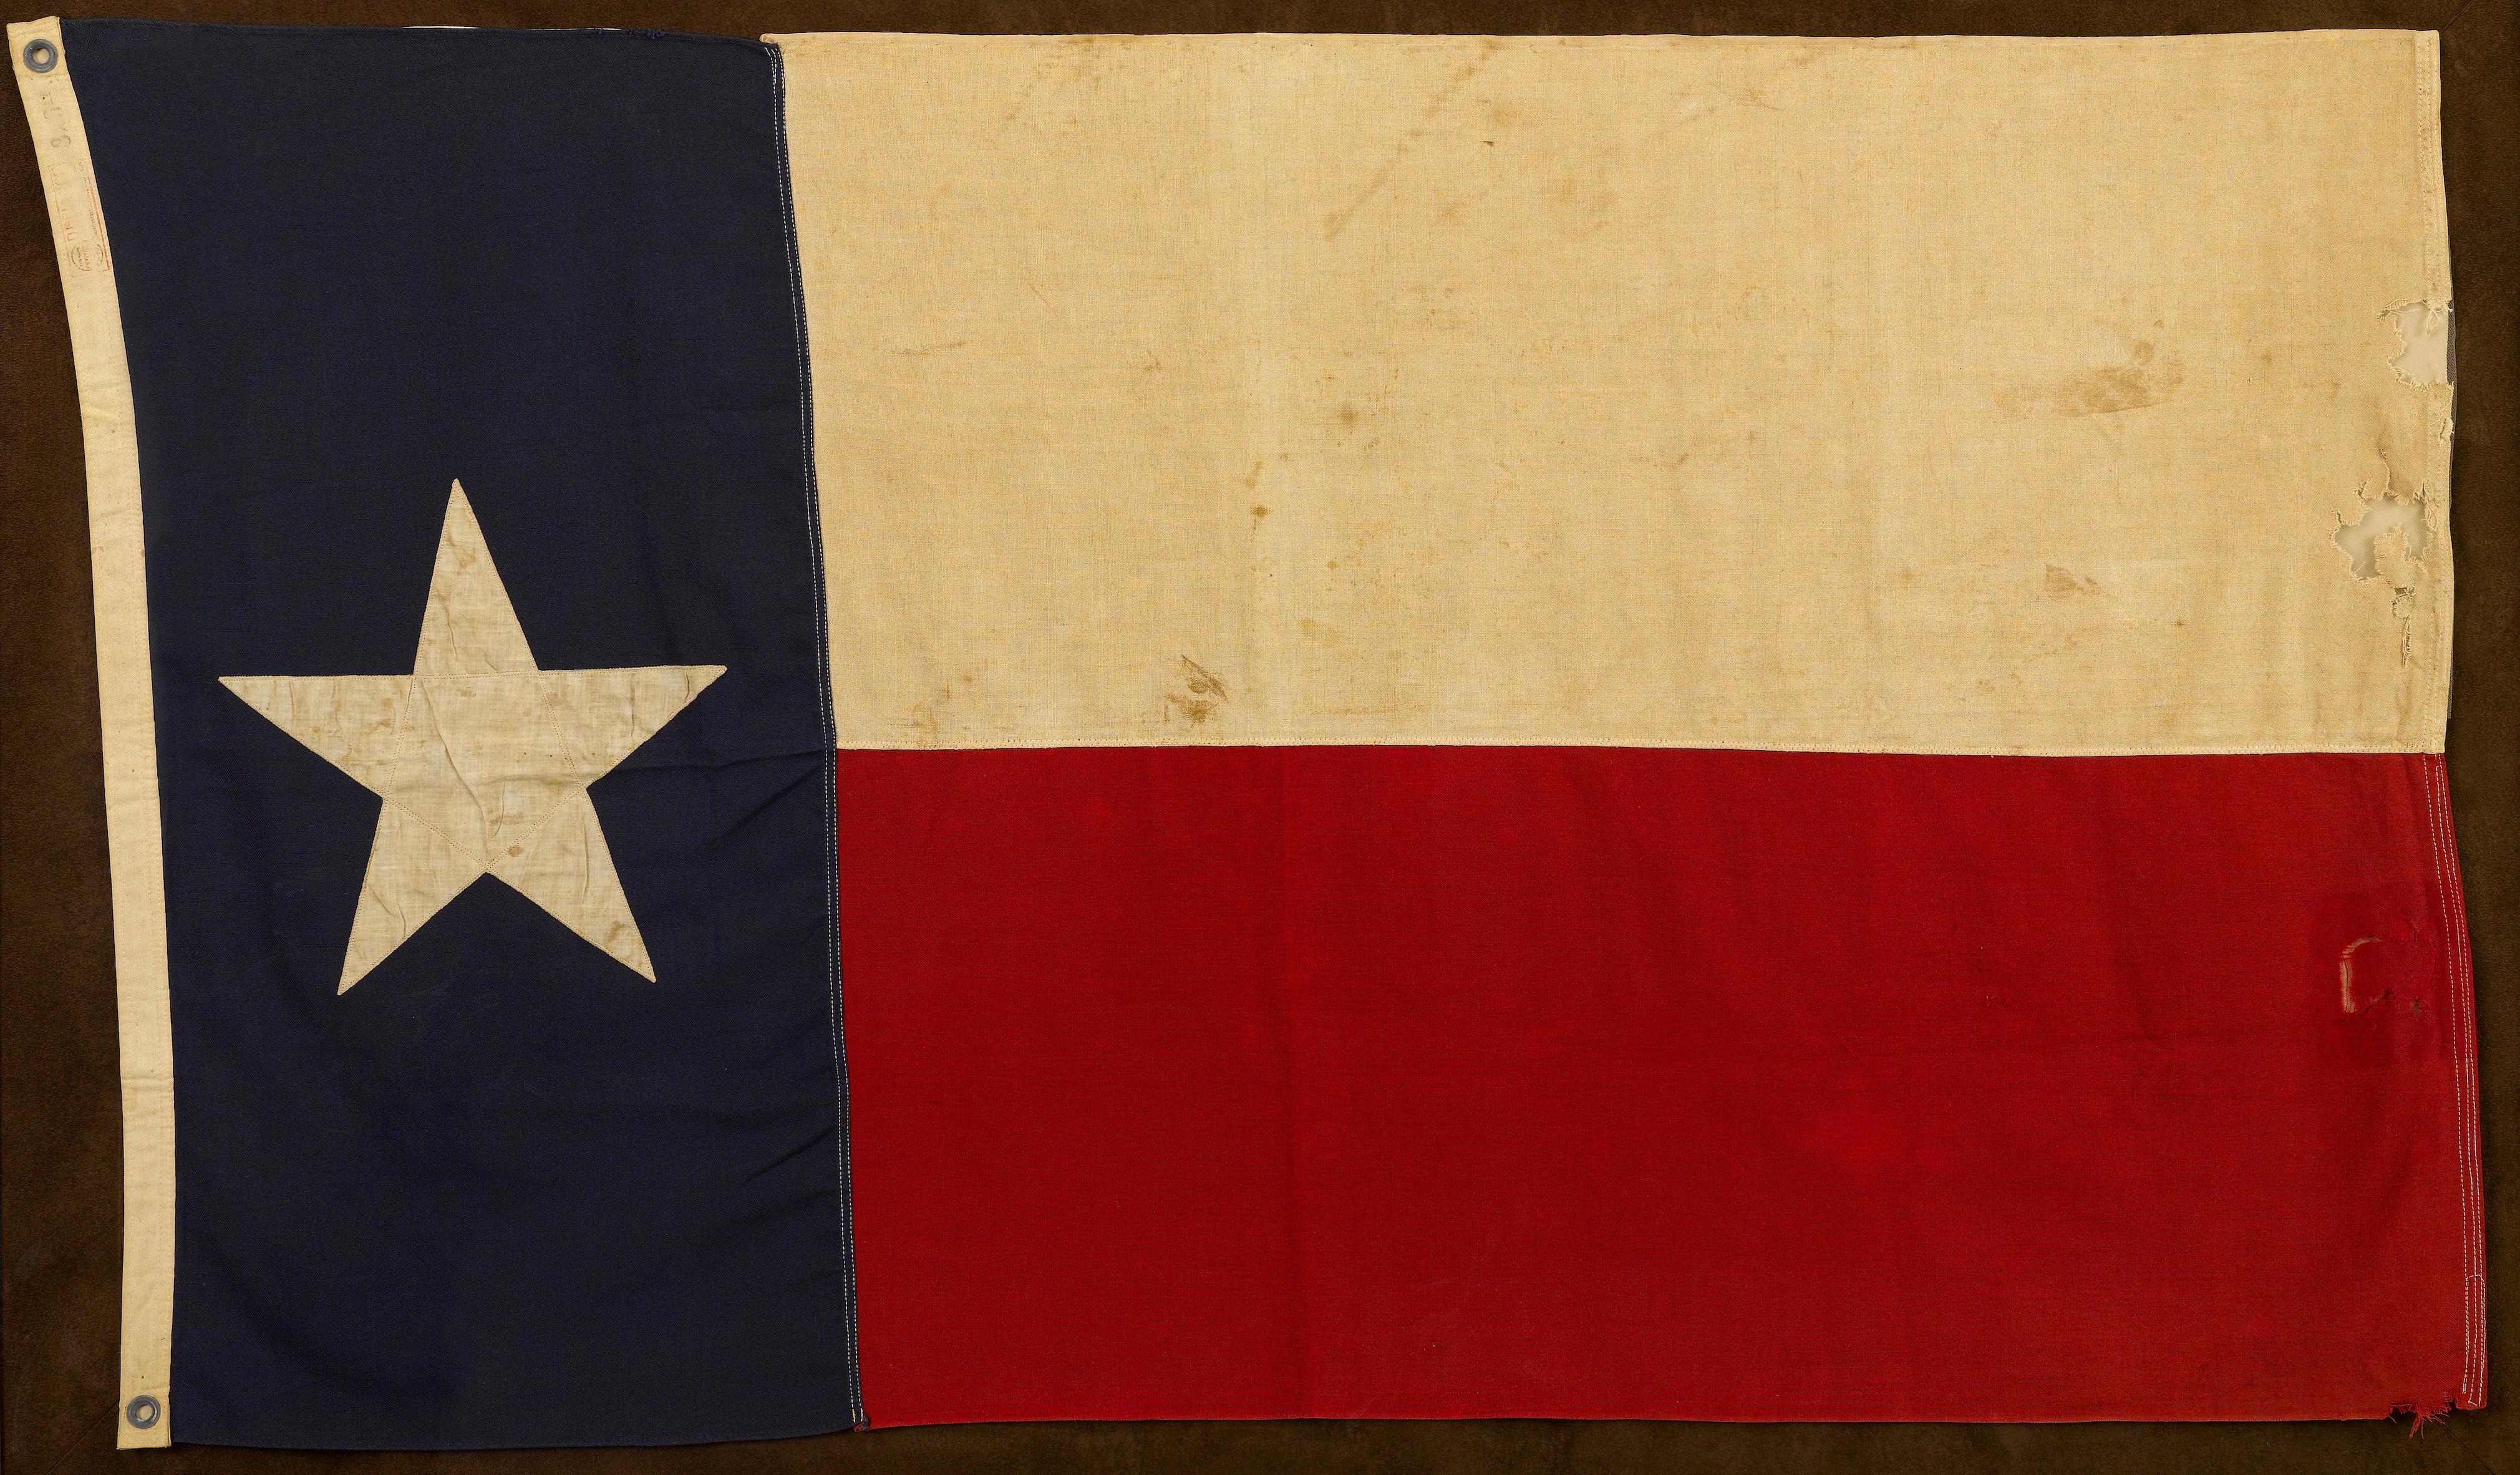 This is vintage Texas state flag, produced by Annin Flag Company in the 1930s. The flag is sewn and measures 3 ft x 5 ft. 

Texas passed its Flag Act in 1933, describing the exact specifications for its flag. The Flag Act named blood red, azure